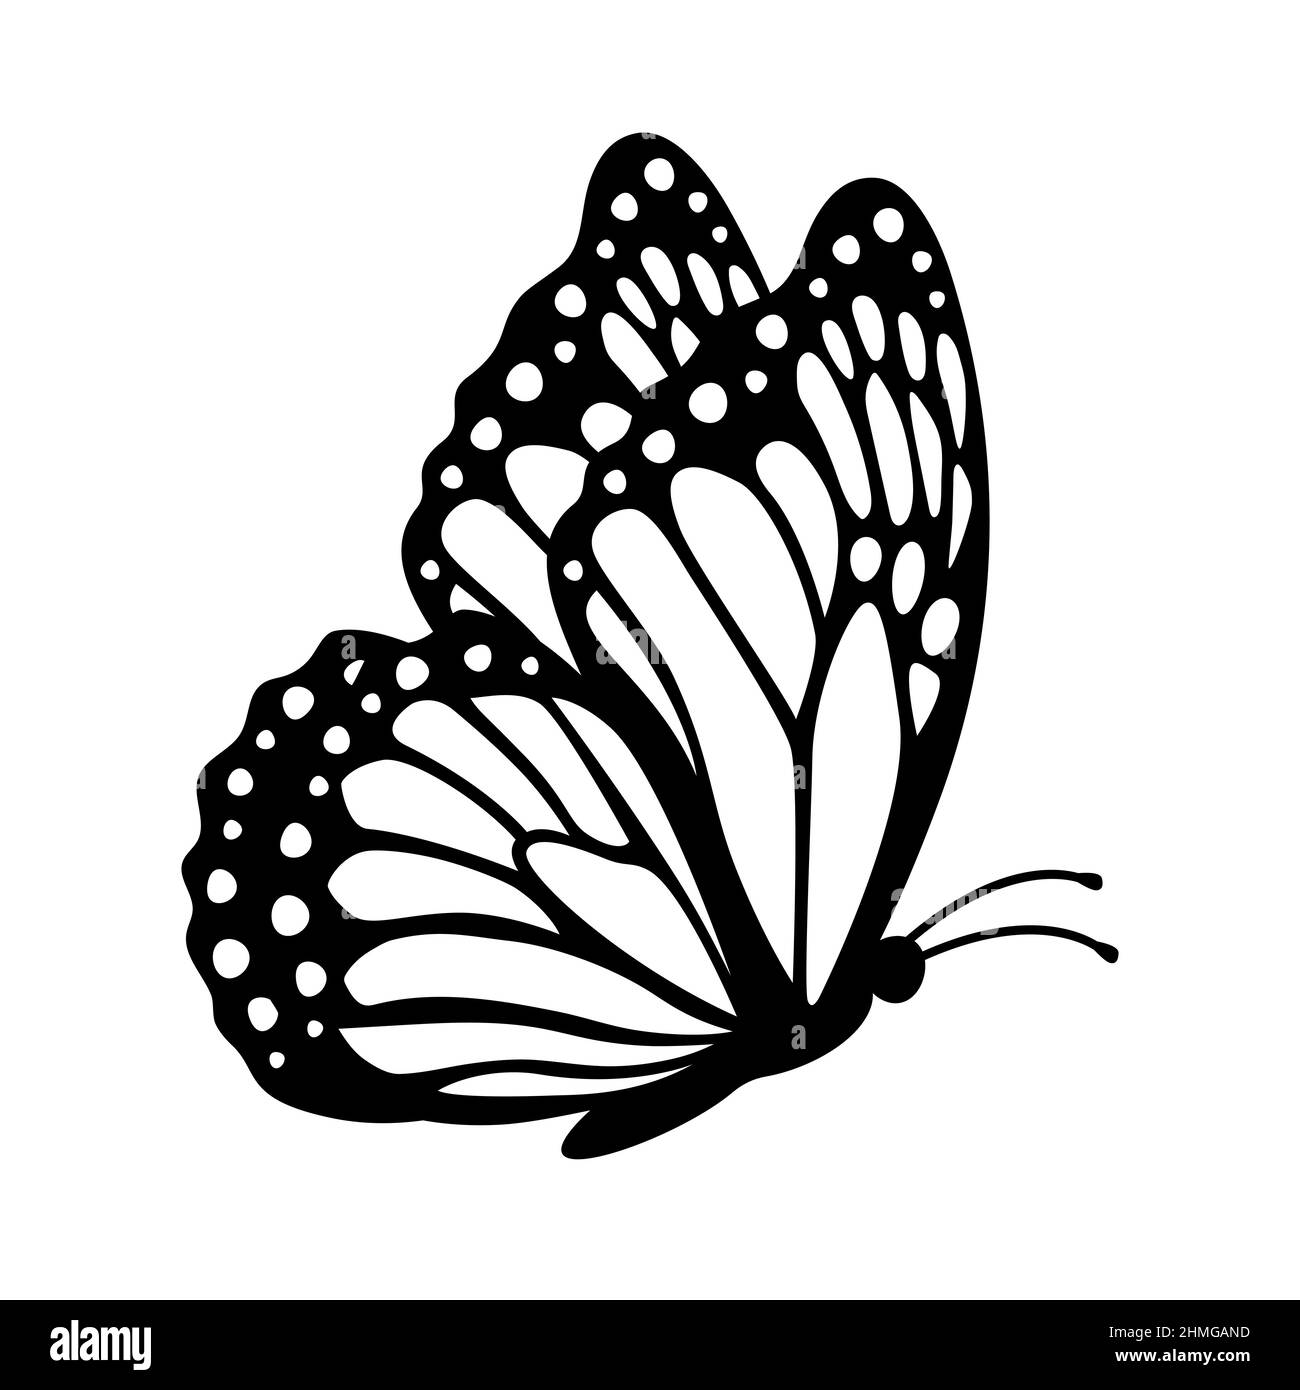 Butterfly silhouette flower Black and White Stock Photos & Images - Alamy